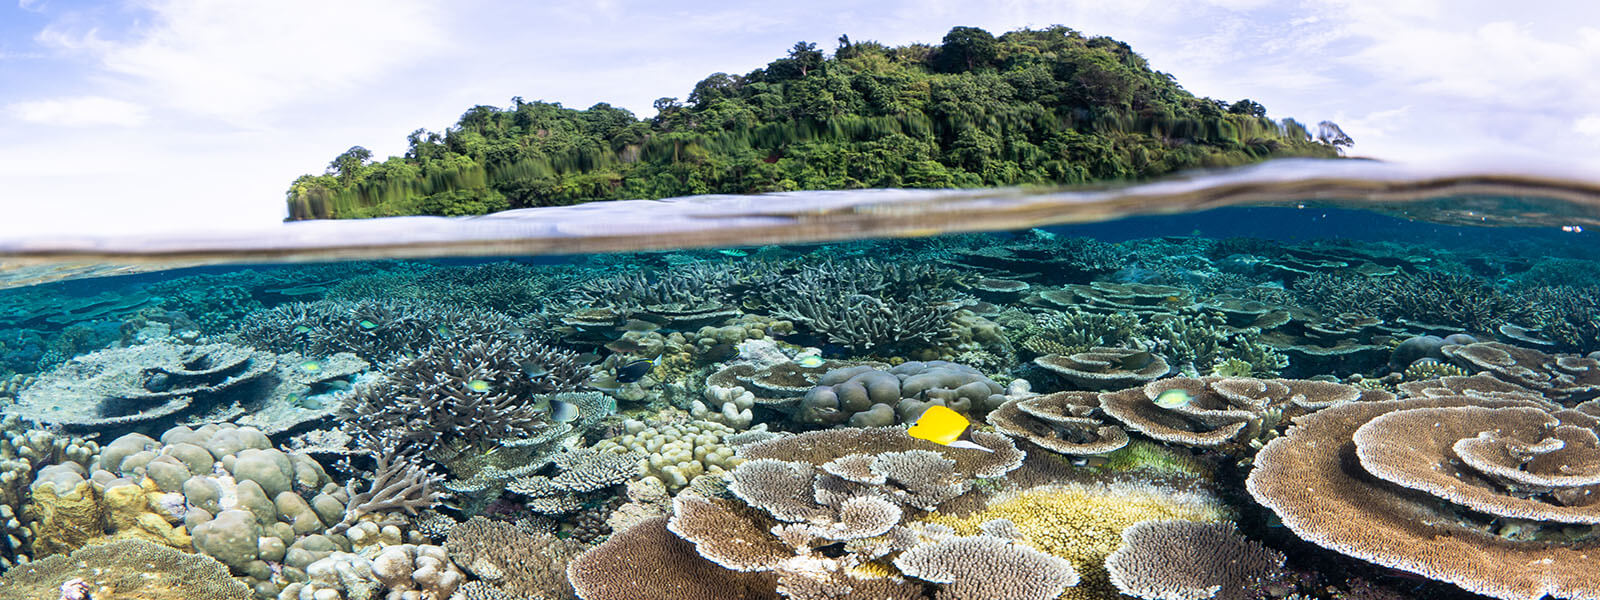 Snorkeling over shallow healthy reefs. Photographed by coral triangle adventures inKimbe Bay, Papua New Guinea